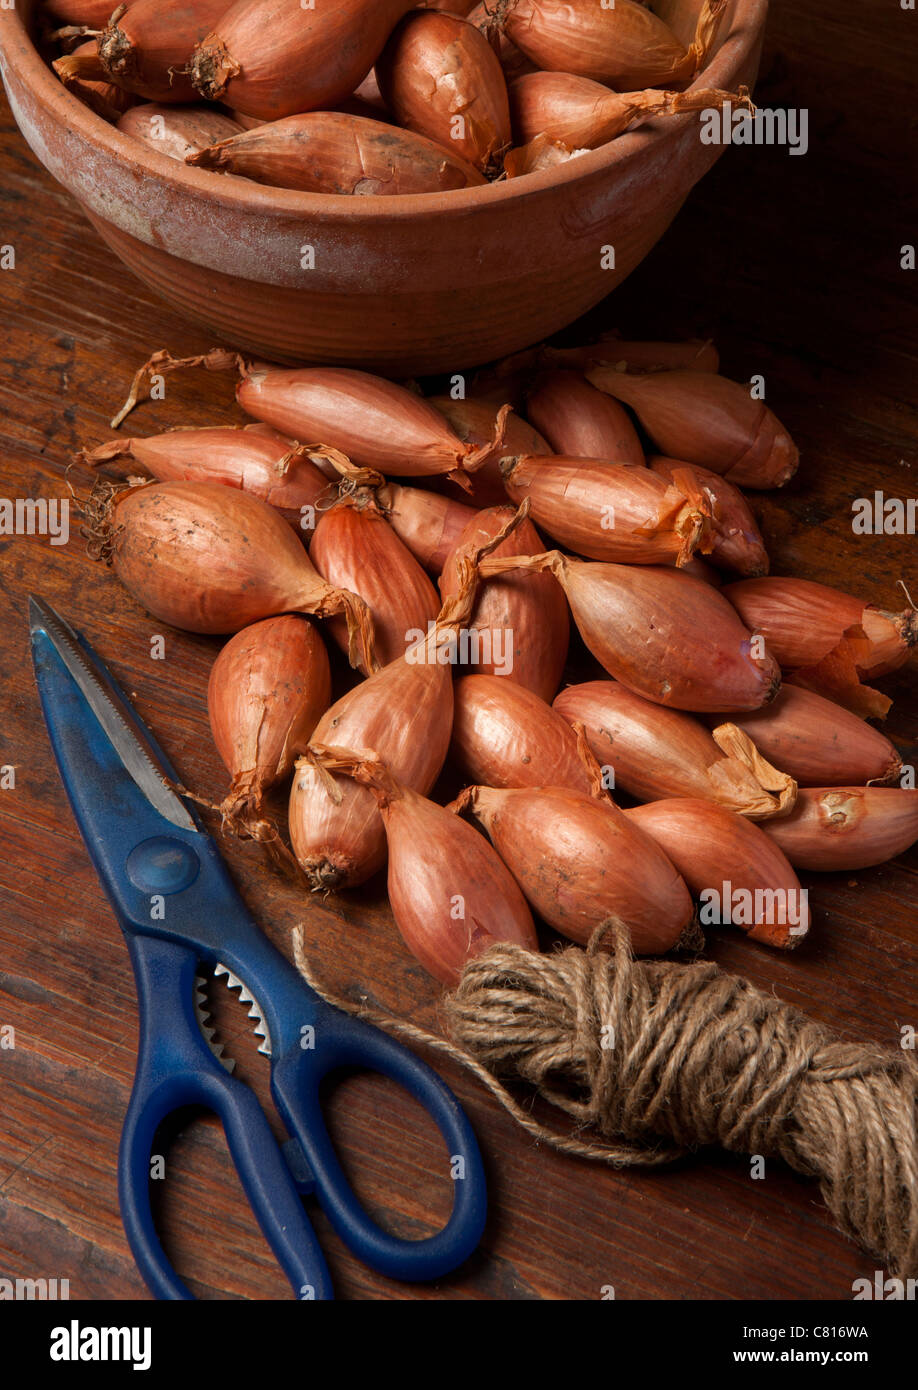 Organic Longor shallots in terracotta bowl garden twine and scissors in foreground Stock Photo